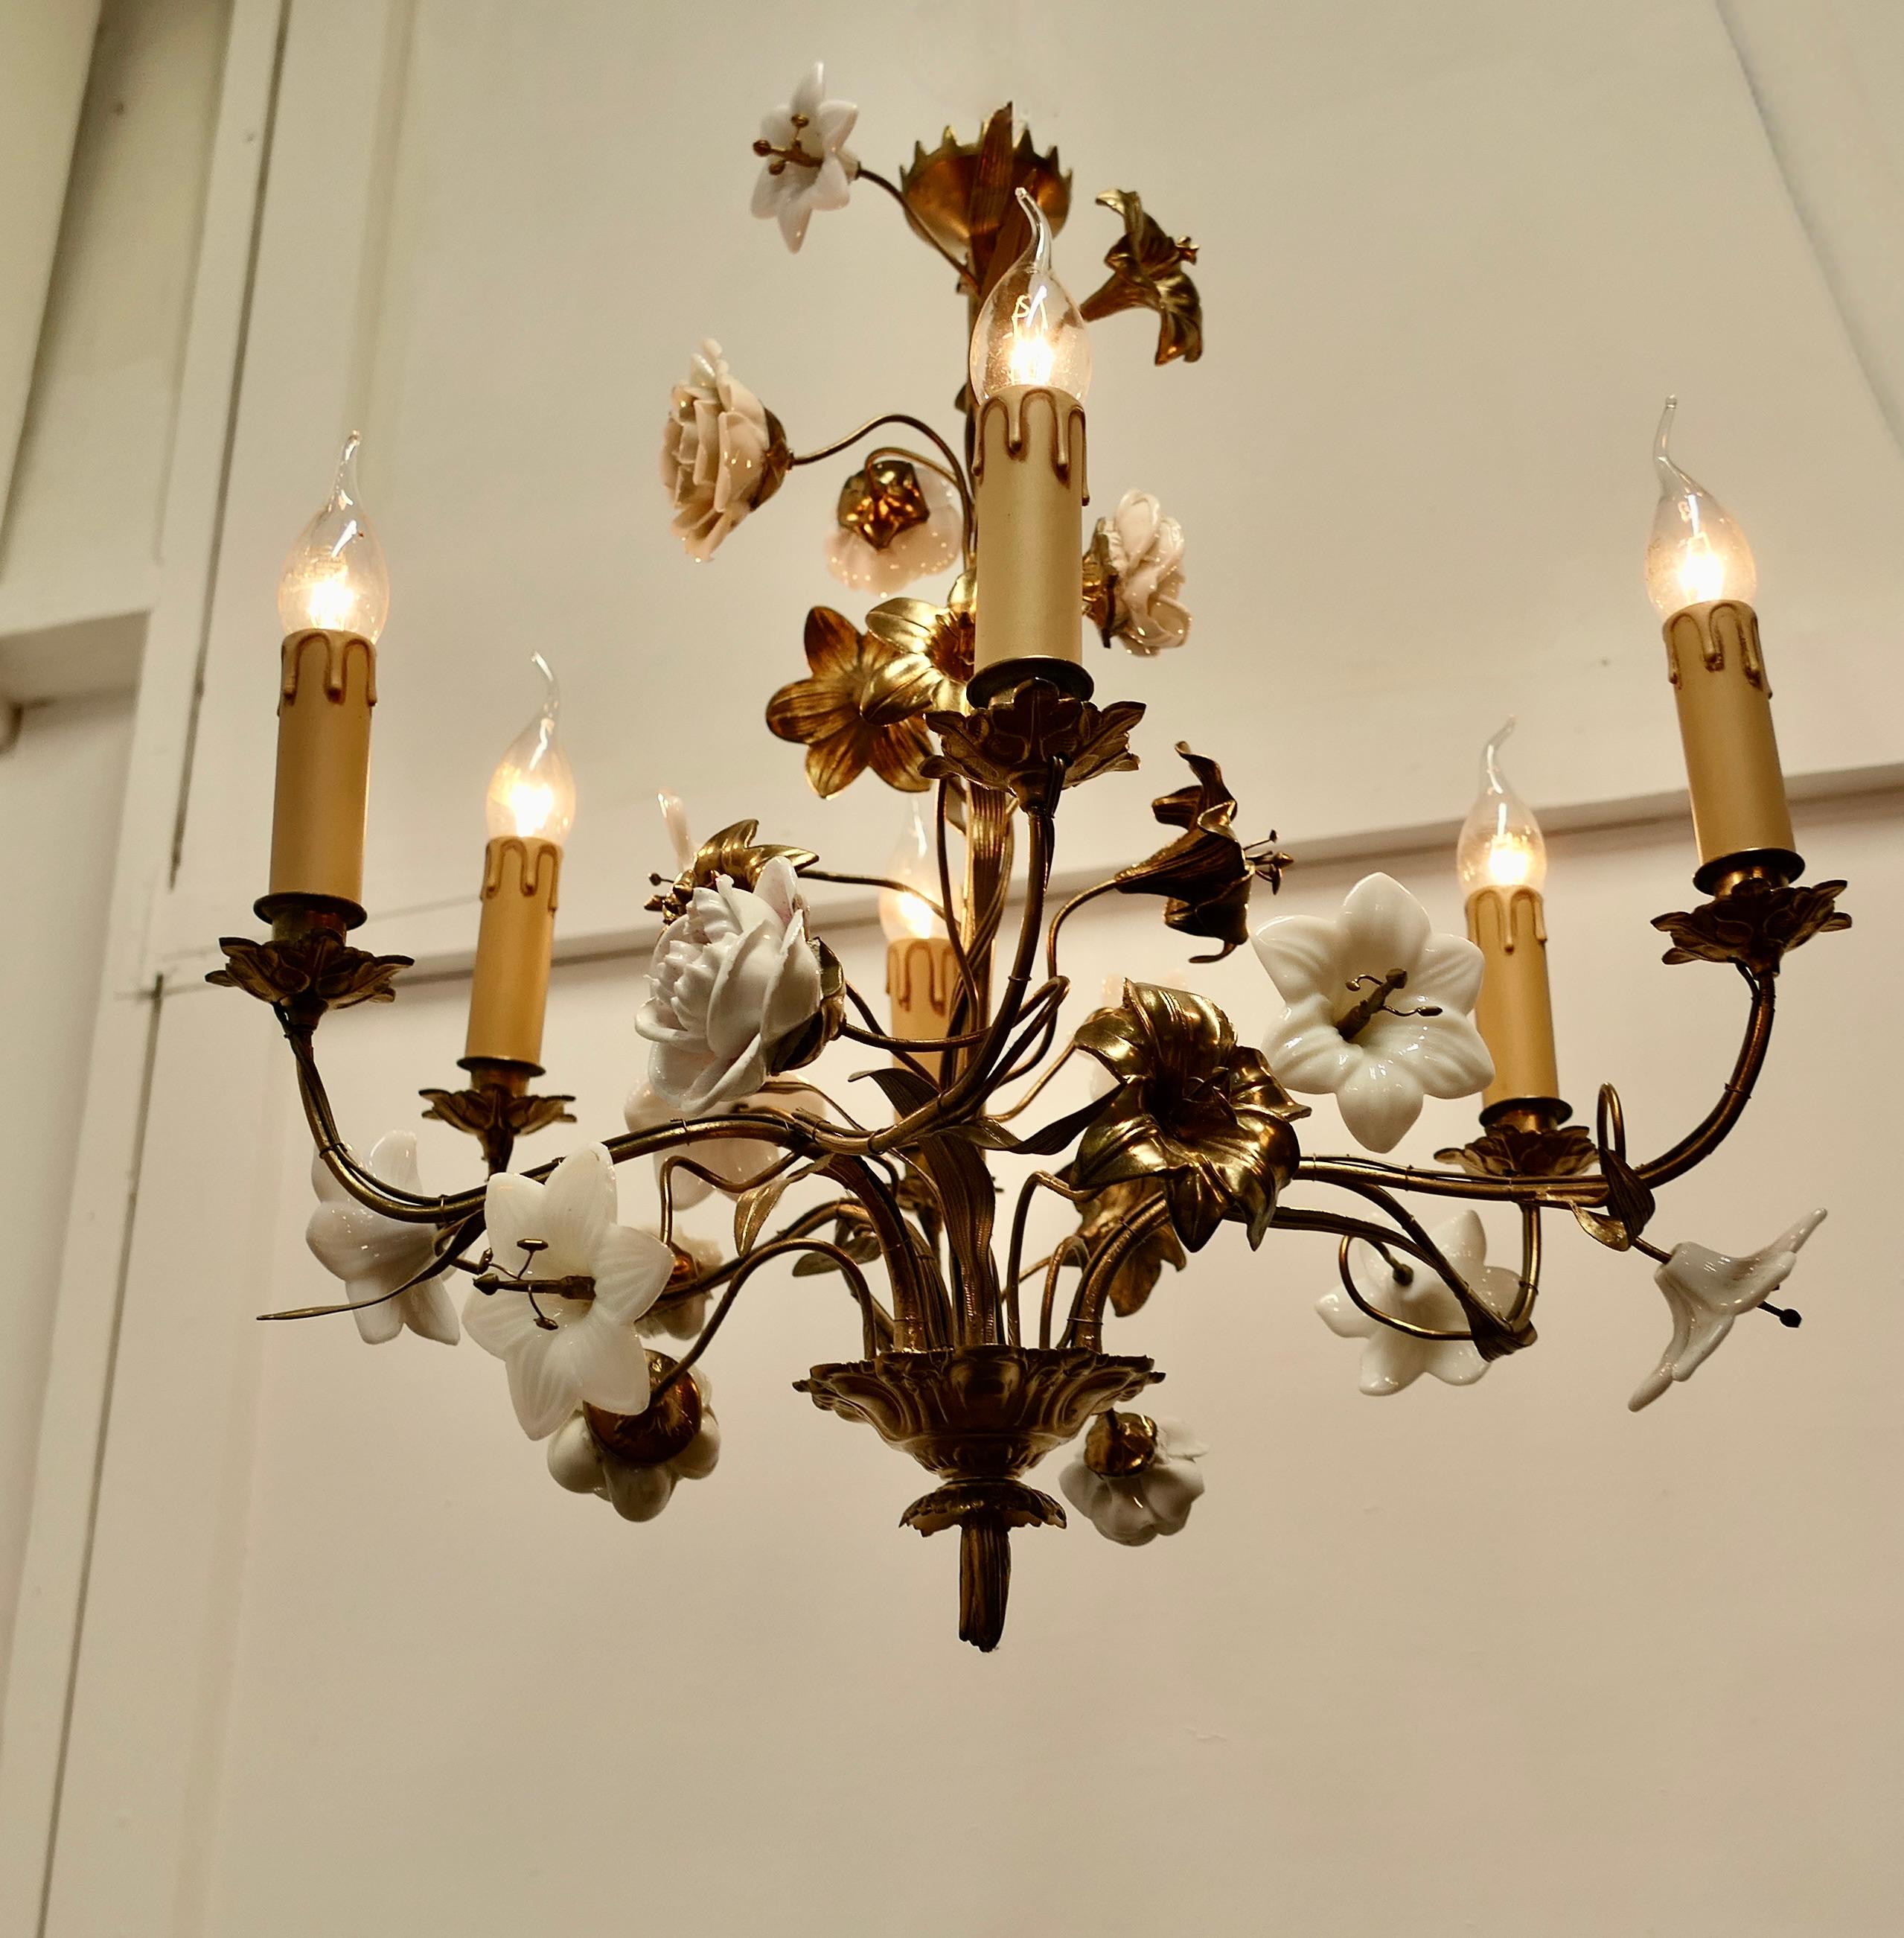 Late 19th Century French Gilt Toleware and Floral Ceramic 6 Branch Chandelier For Sale